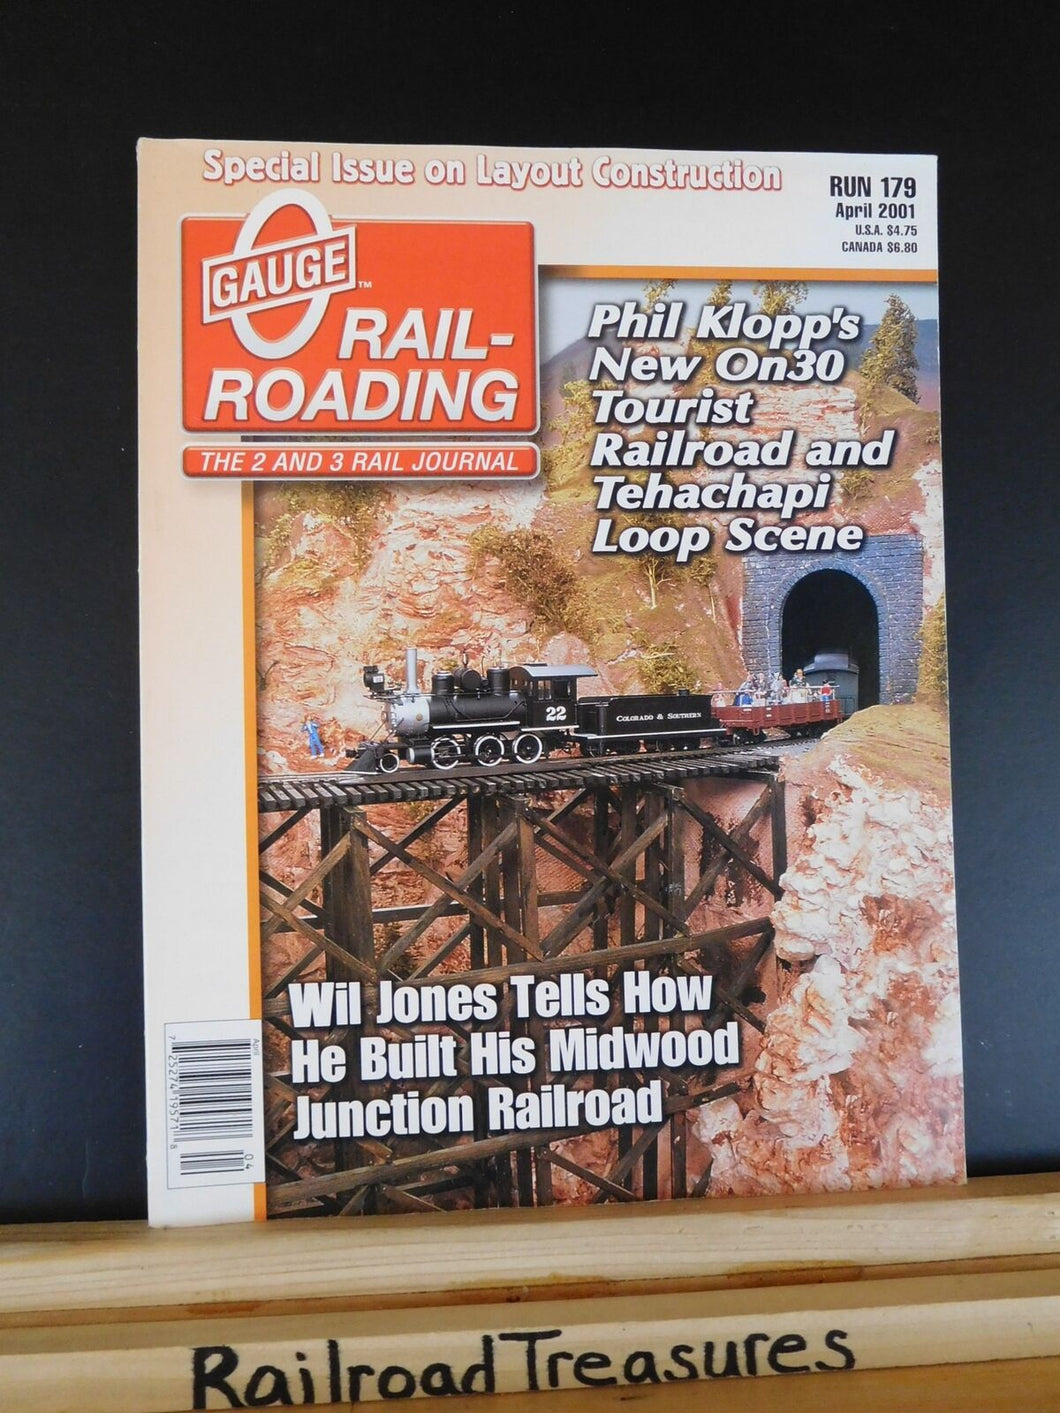 O Gauge Railroading #179 2001 April Special issue on Layout Construction